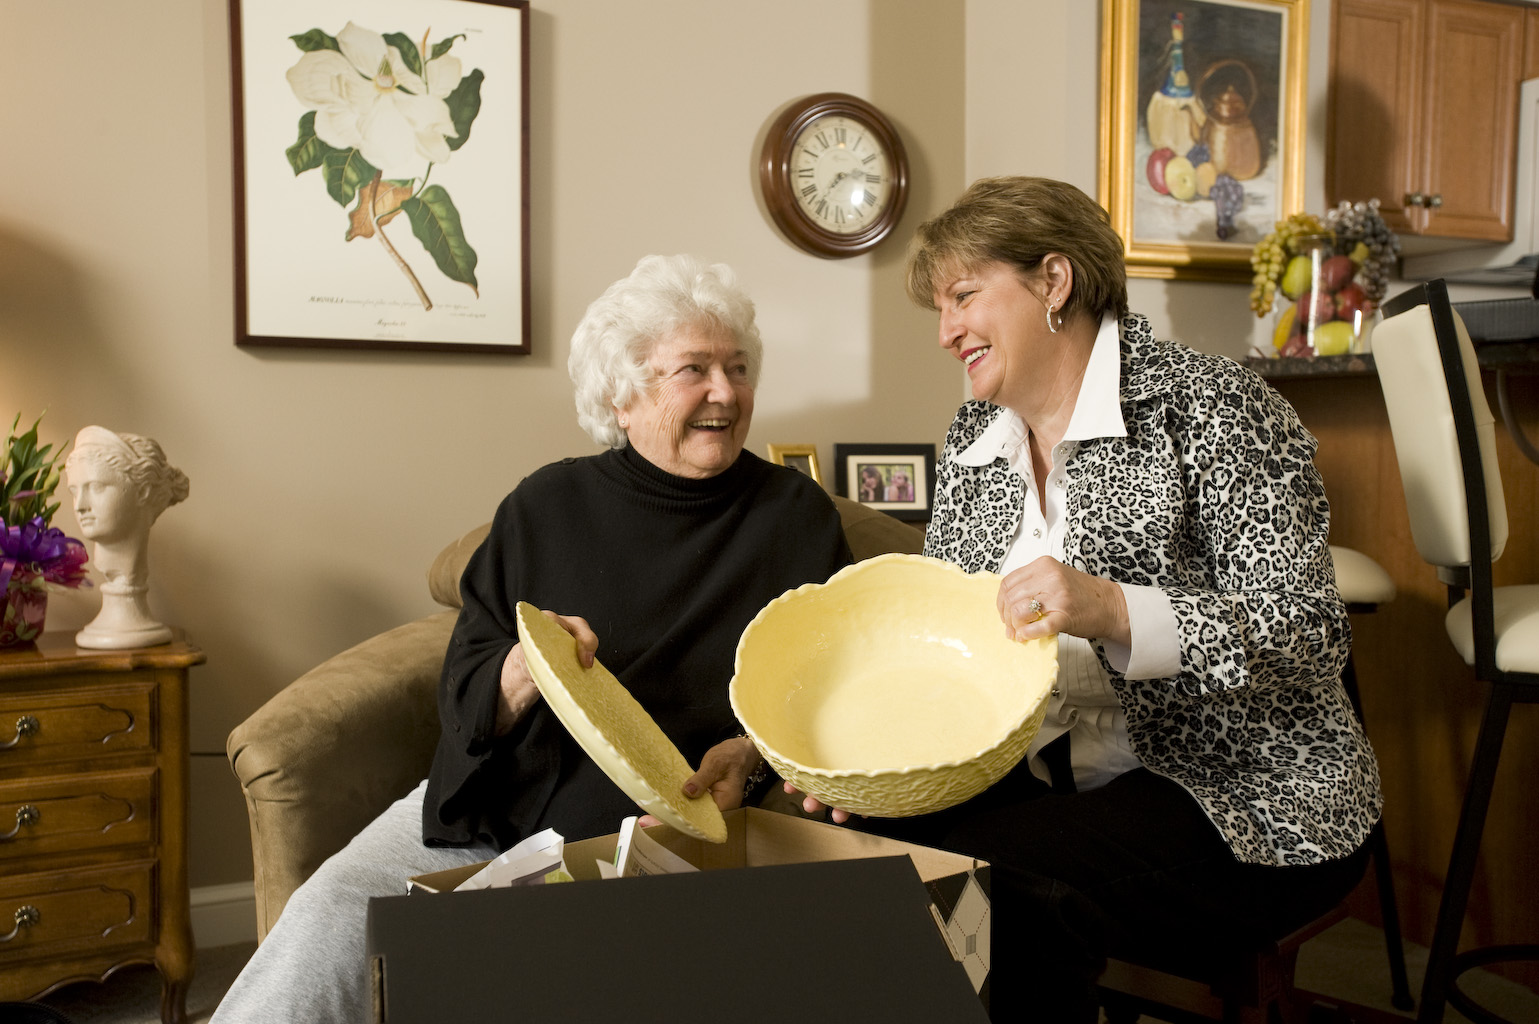 Two senior ladies laughing in a retirement or long term care room looking at a gift. They look happy